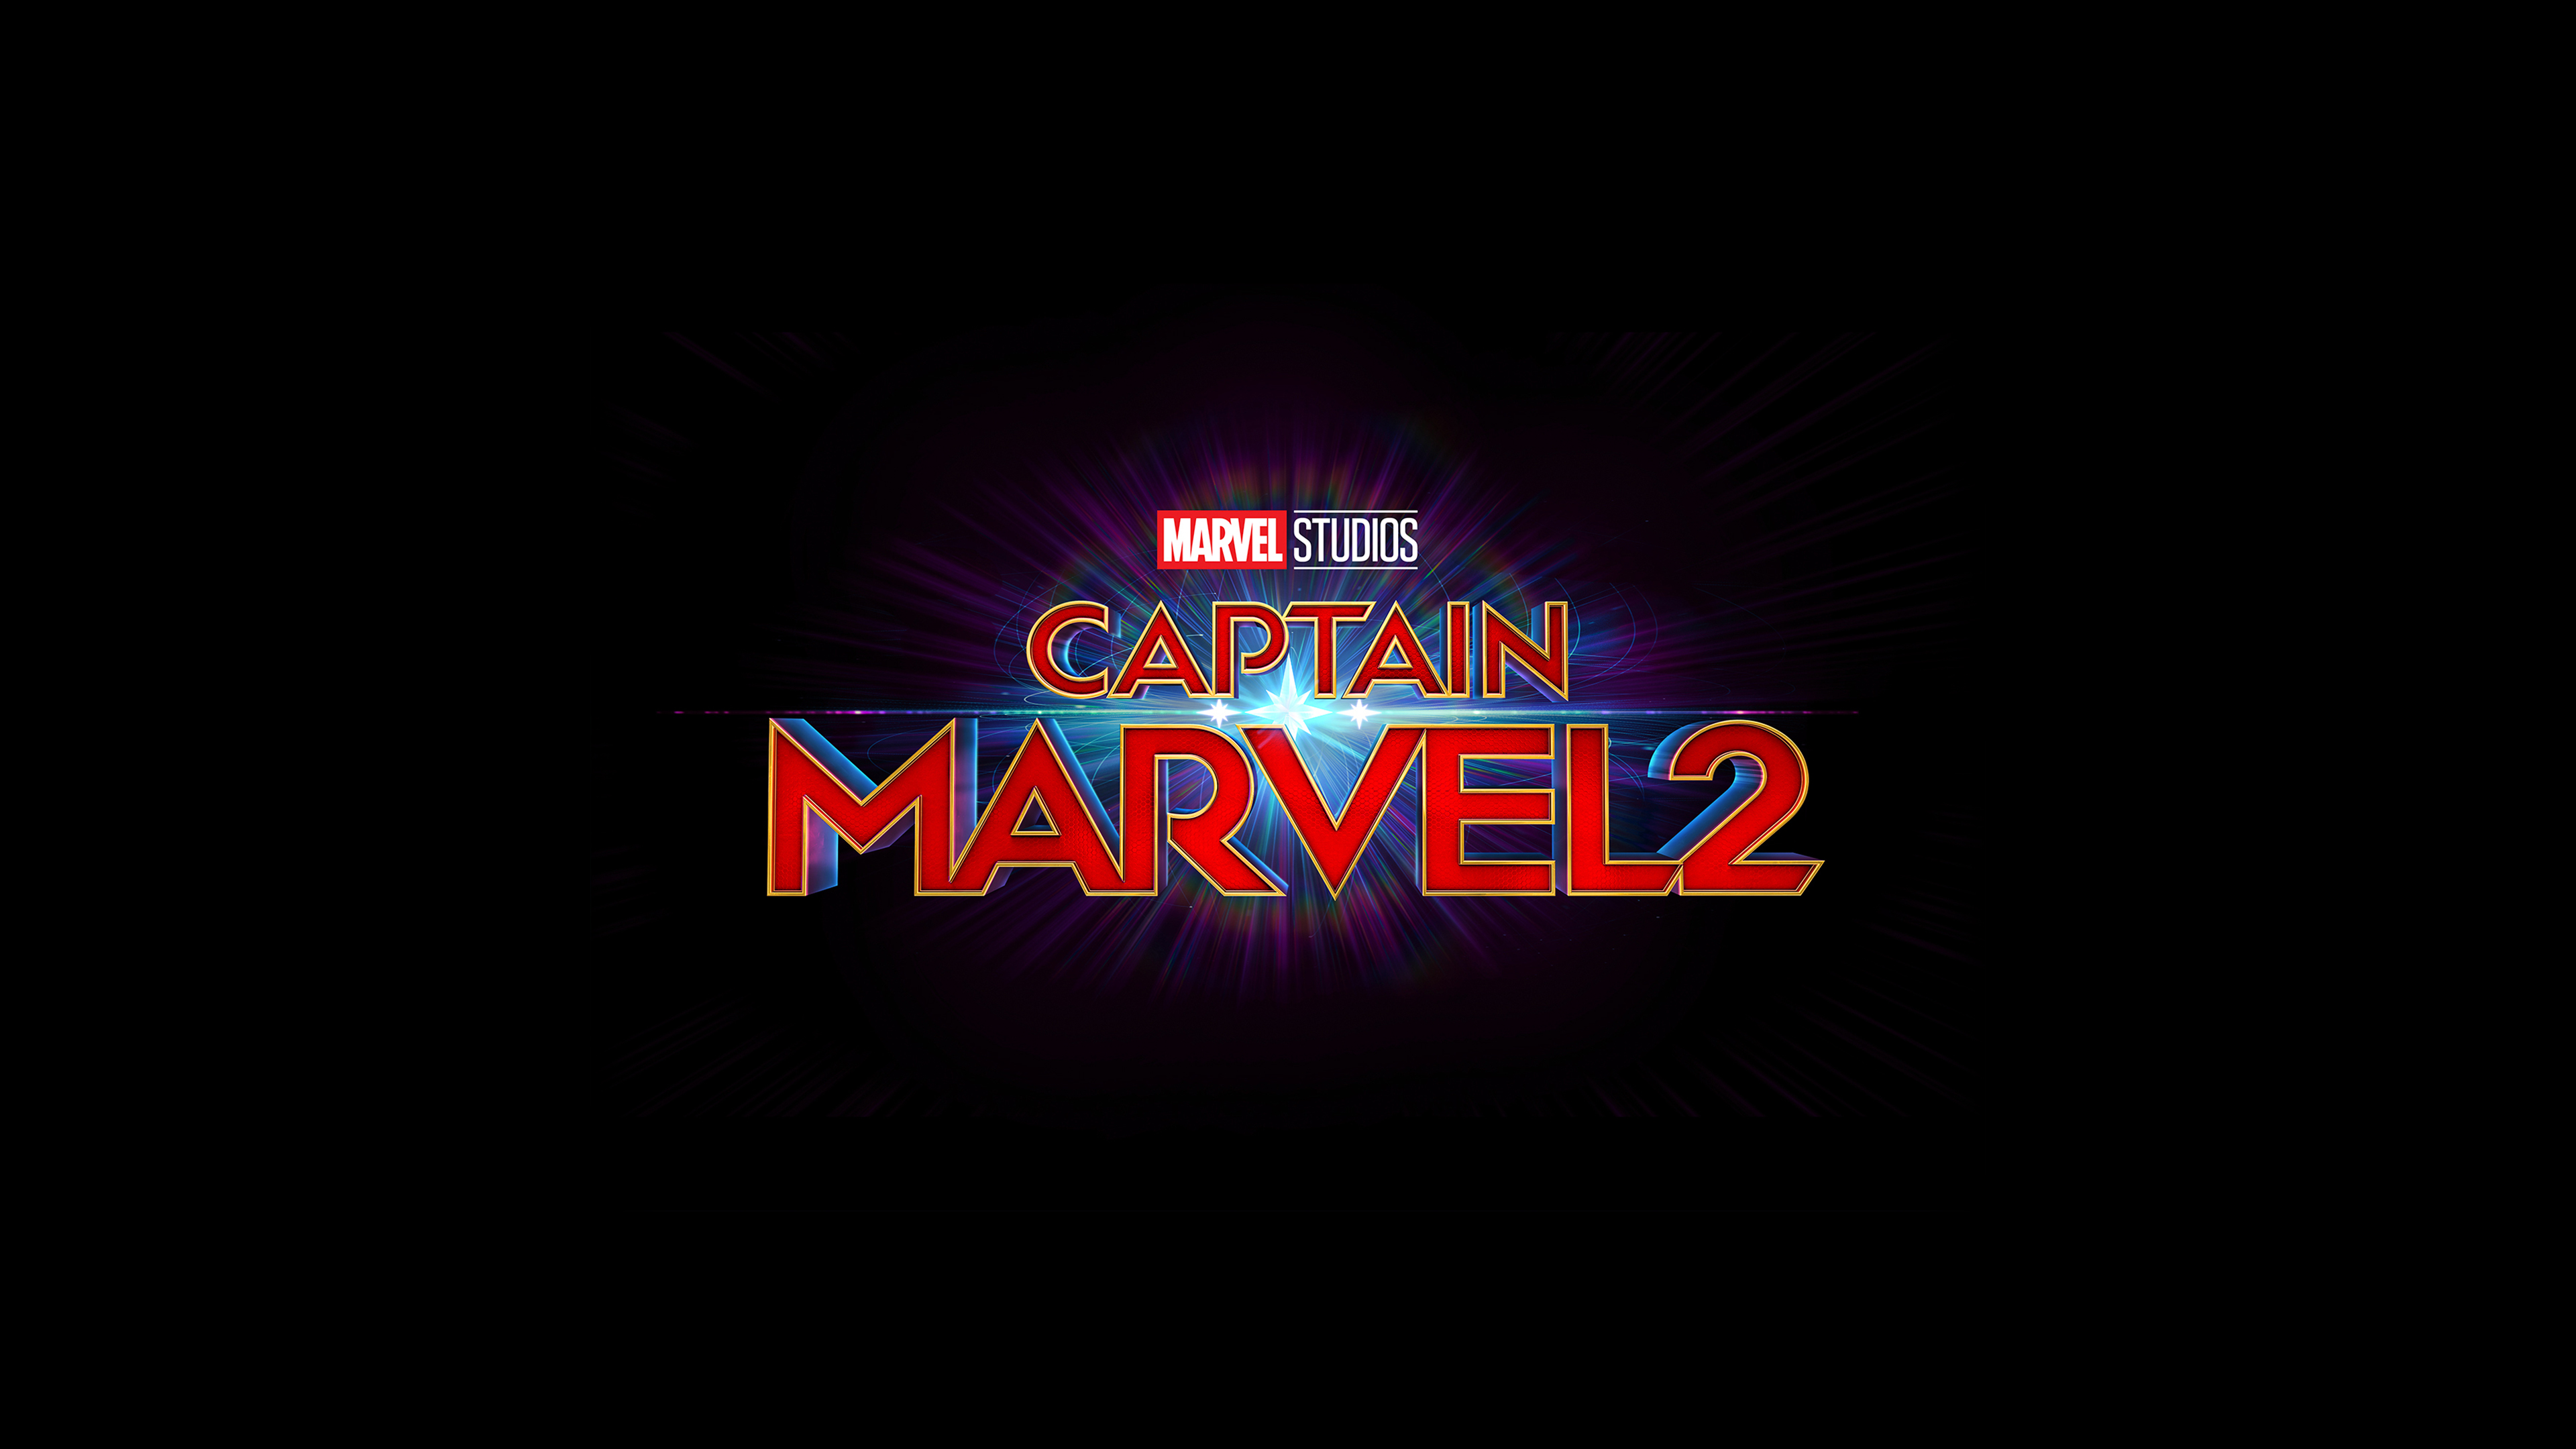 The Marvels Wallpaper 4K, Captain Marvel 2022 Movies, Black background, Movies